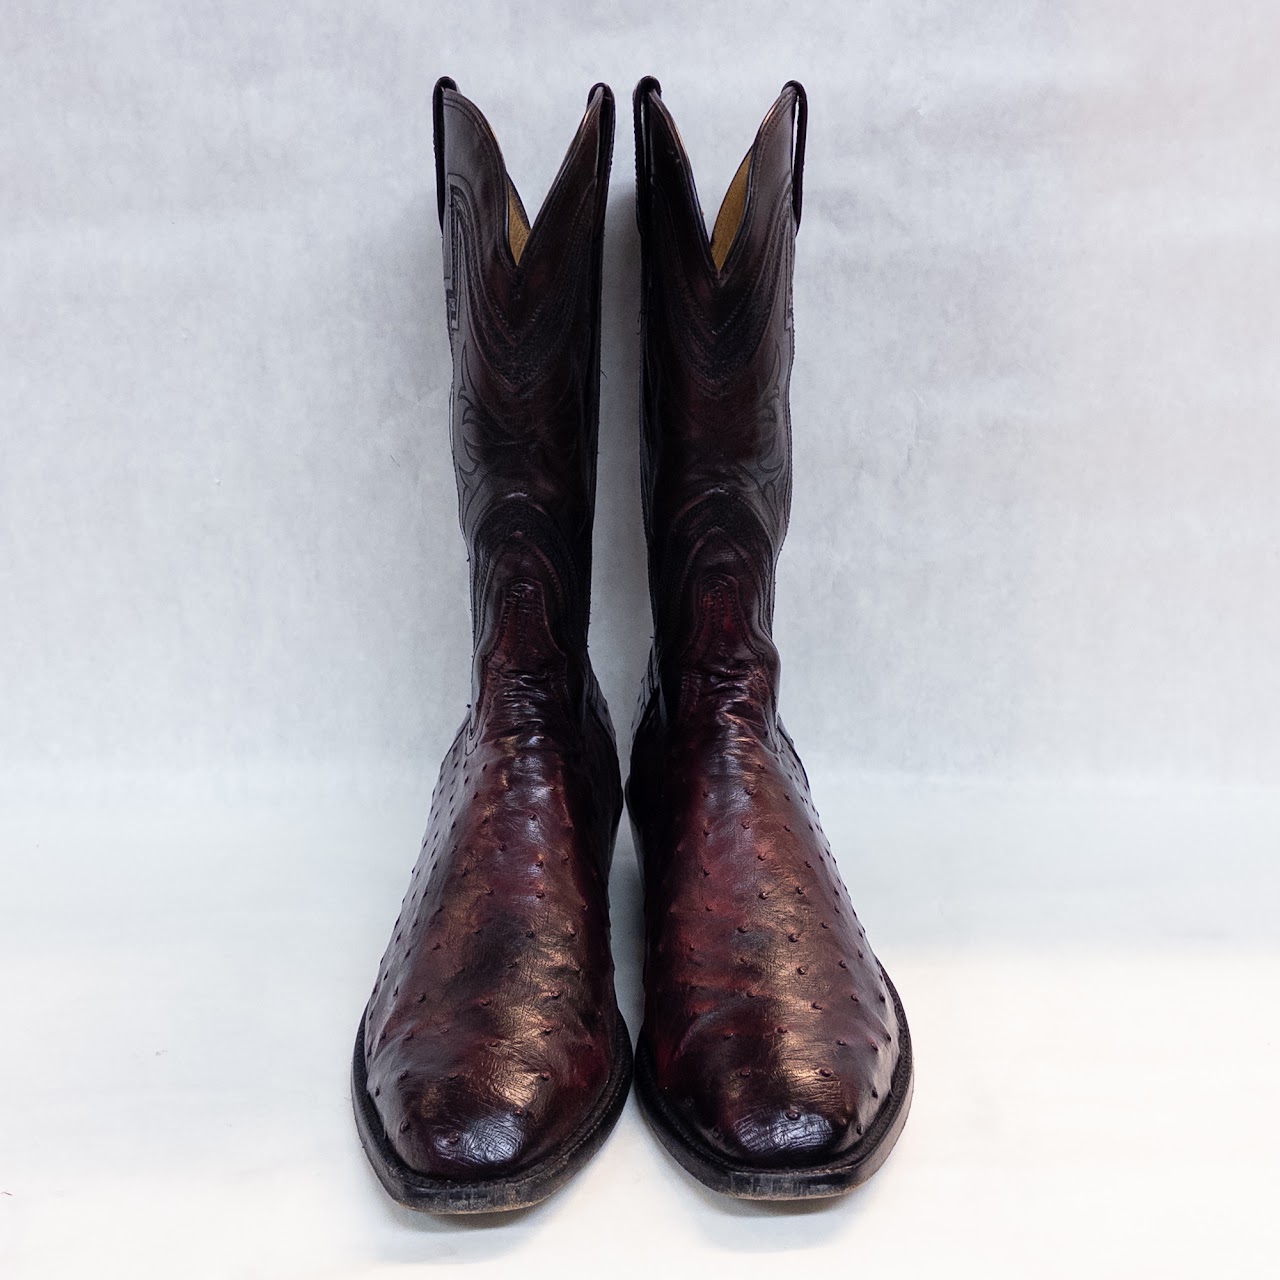 Lucchese Ostrich and Cow Leather Cowboy Boots